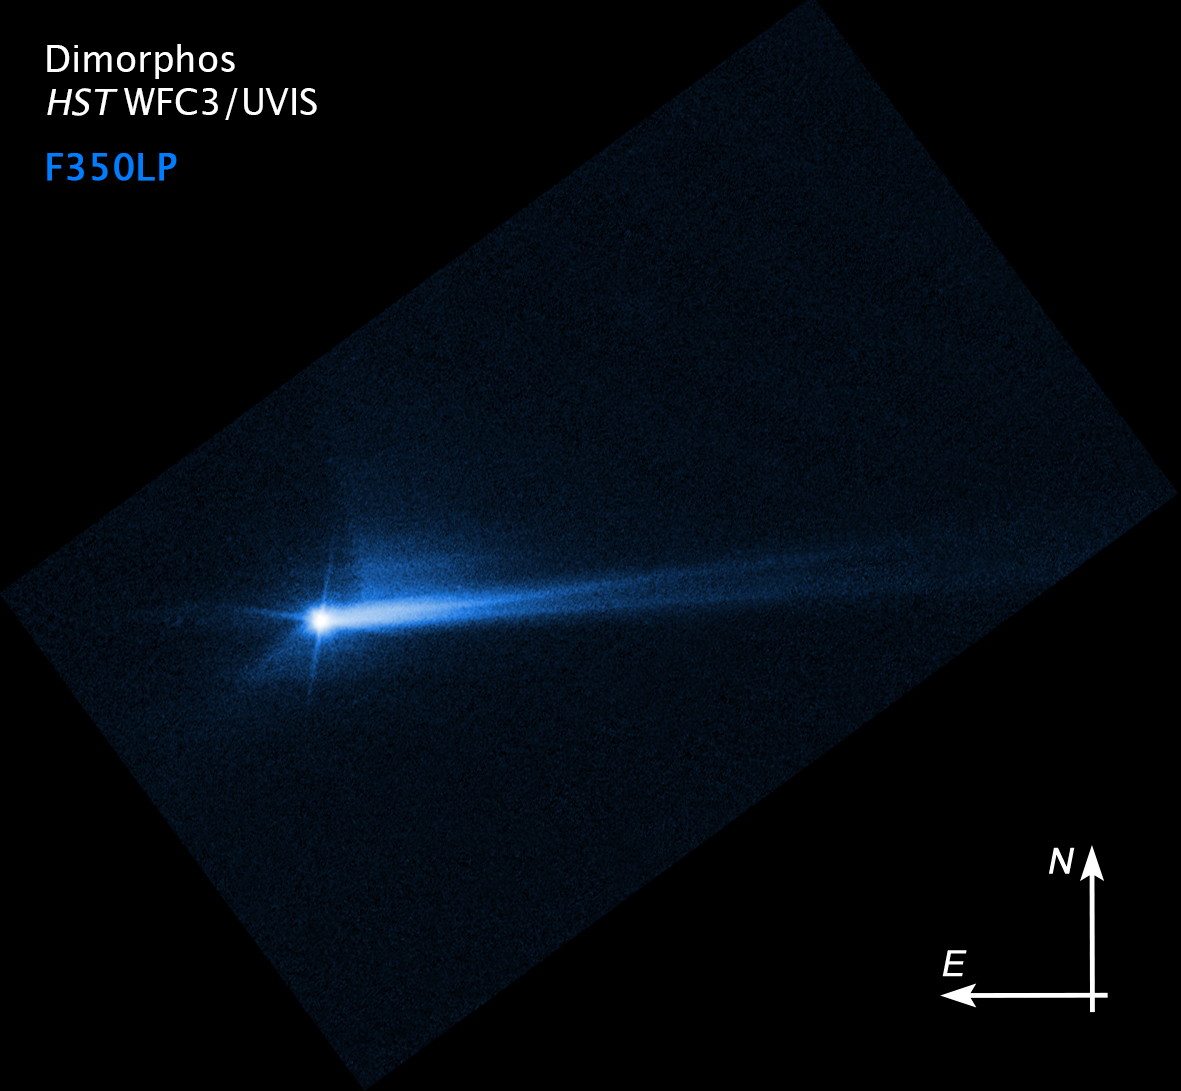 Image from Hubble Space Telescope of DART's impact into Dimorphos